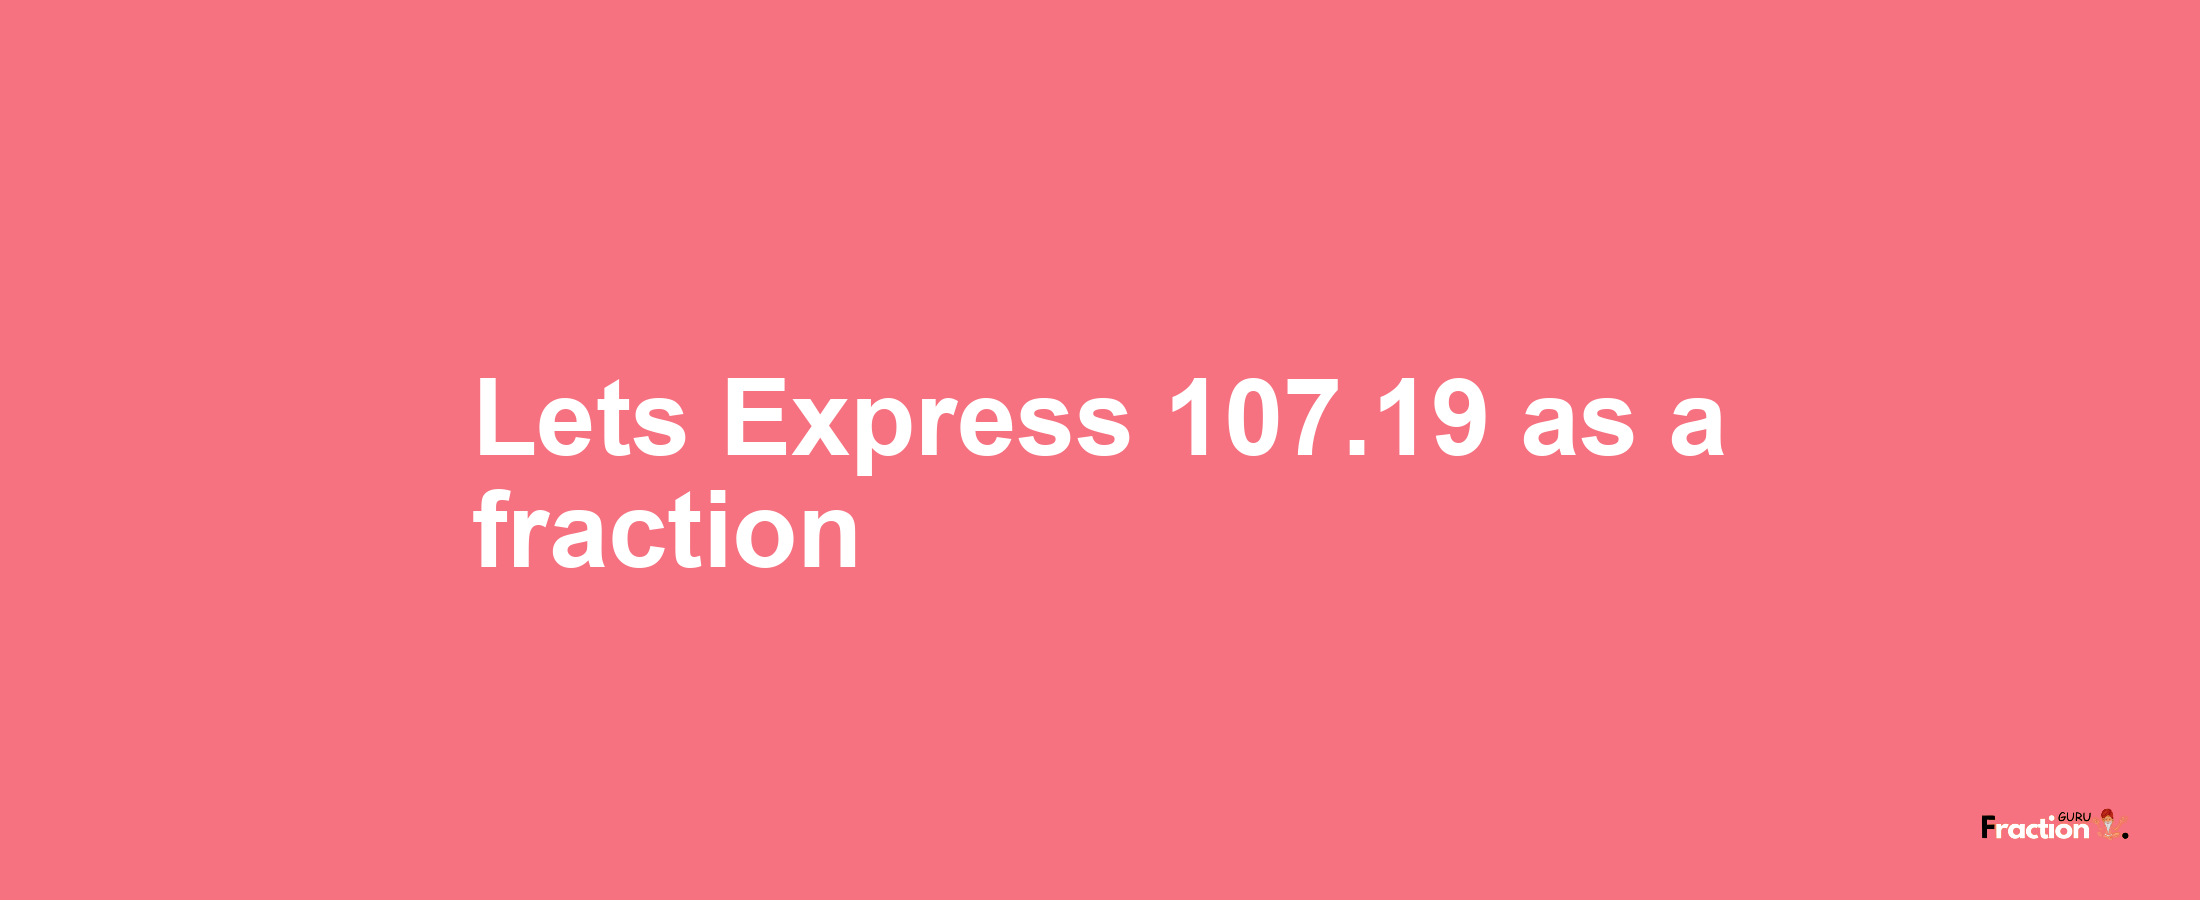 Lets Express 107.19 as afraction